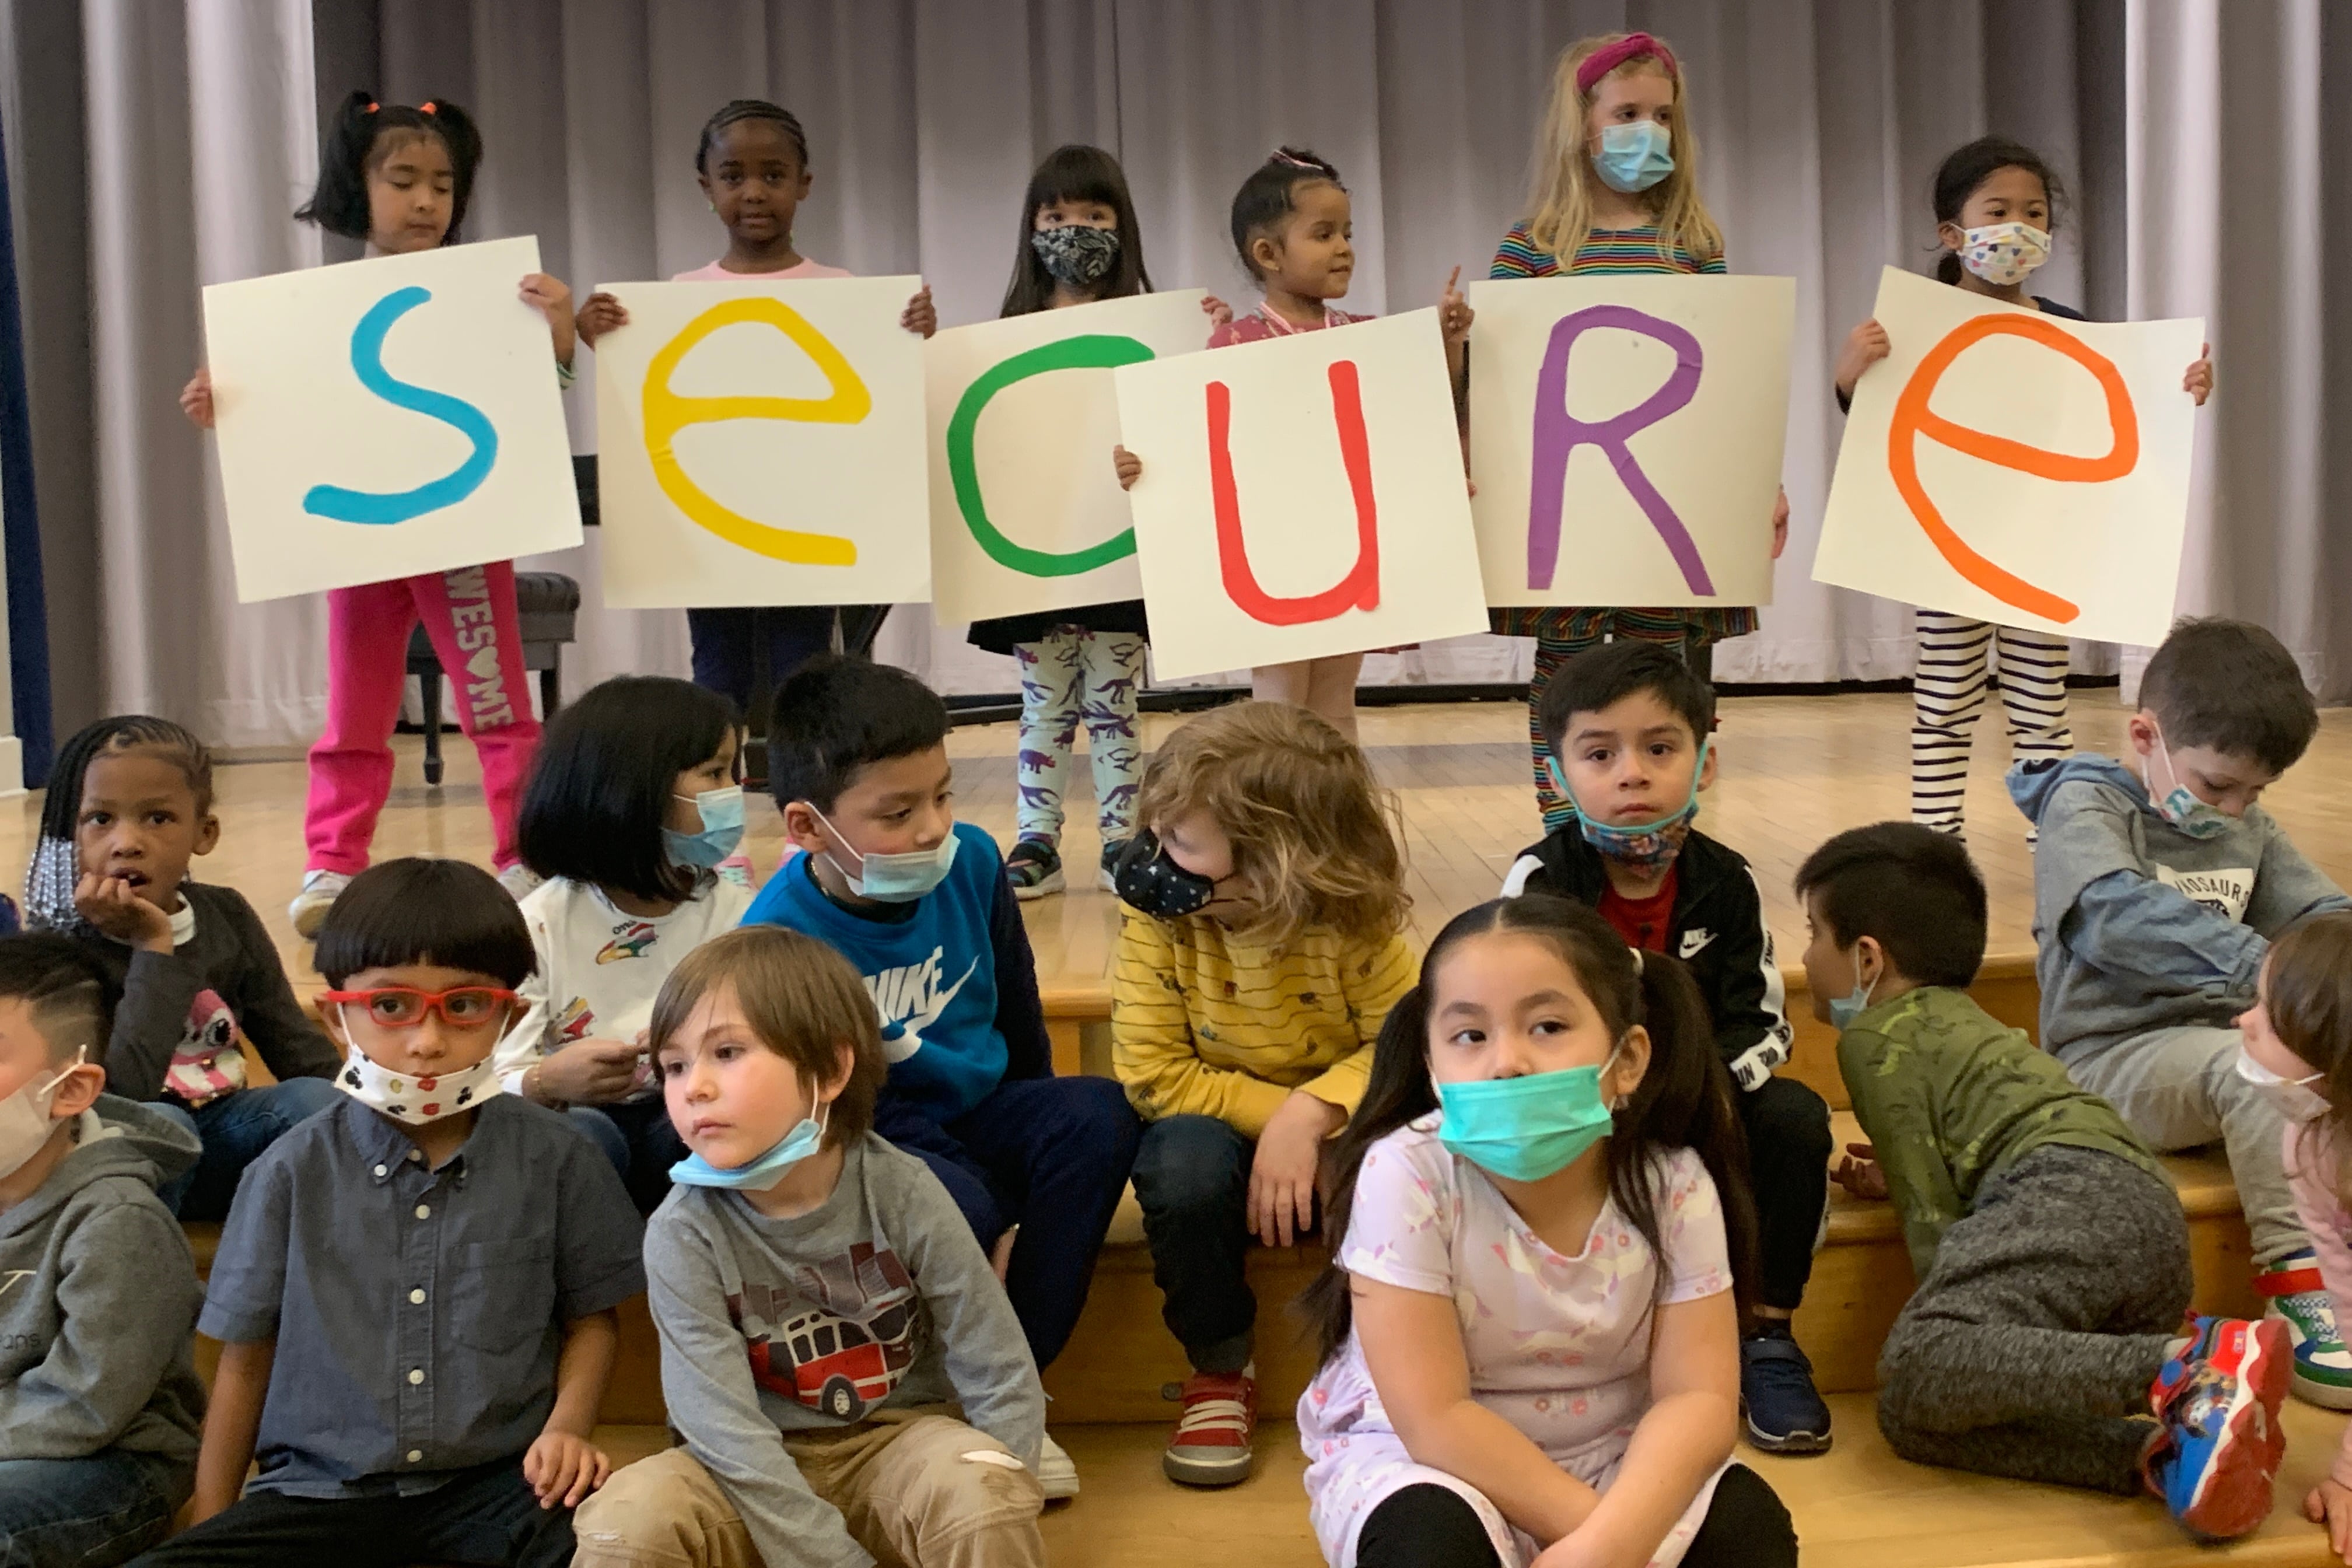 Several children hold up colored letters spelling out “Secure” while standing in front of a curtain as several other children sit in front of them. 